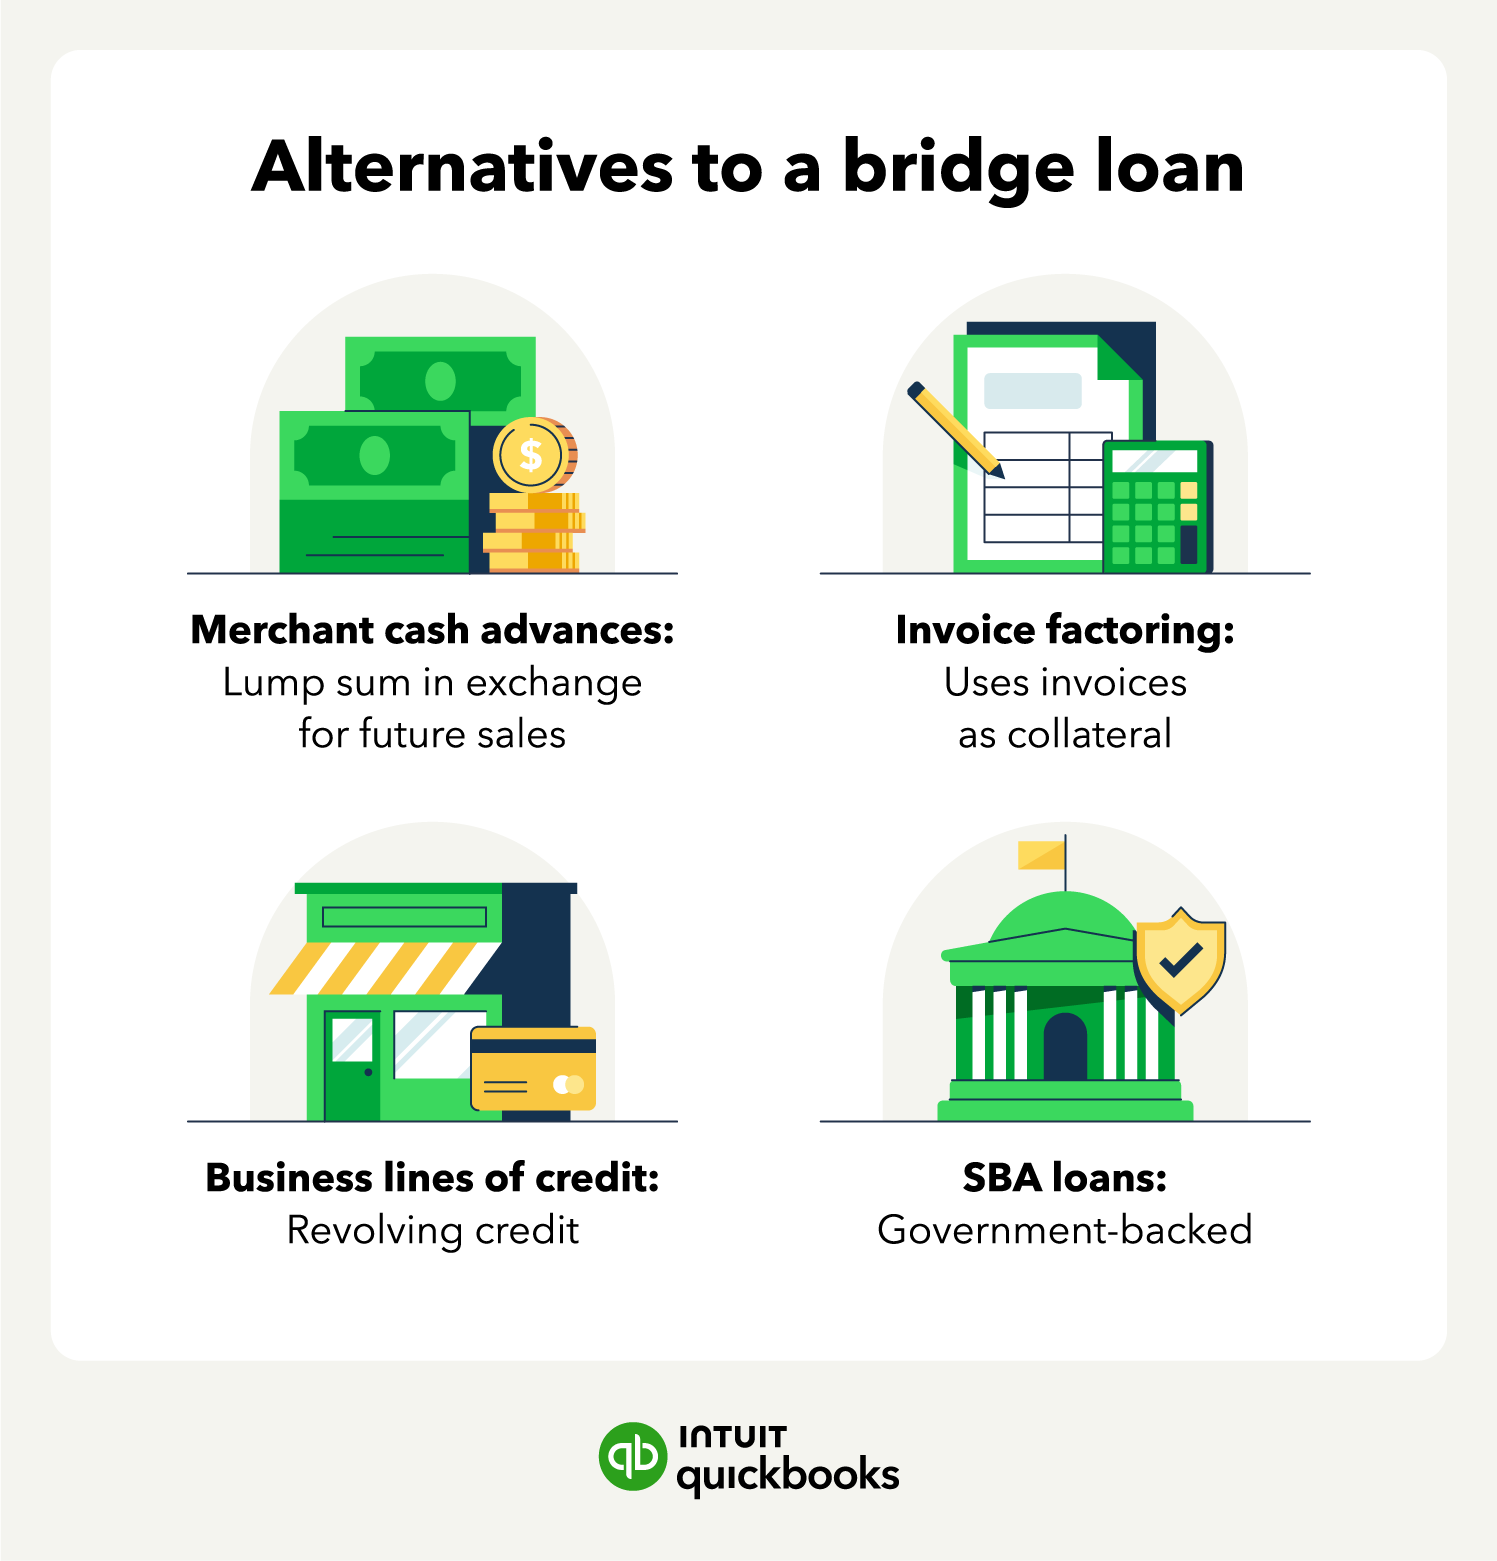 An illustration of the alternatives to a bridge loan, including invoice factoring and business lines of credit.